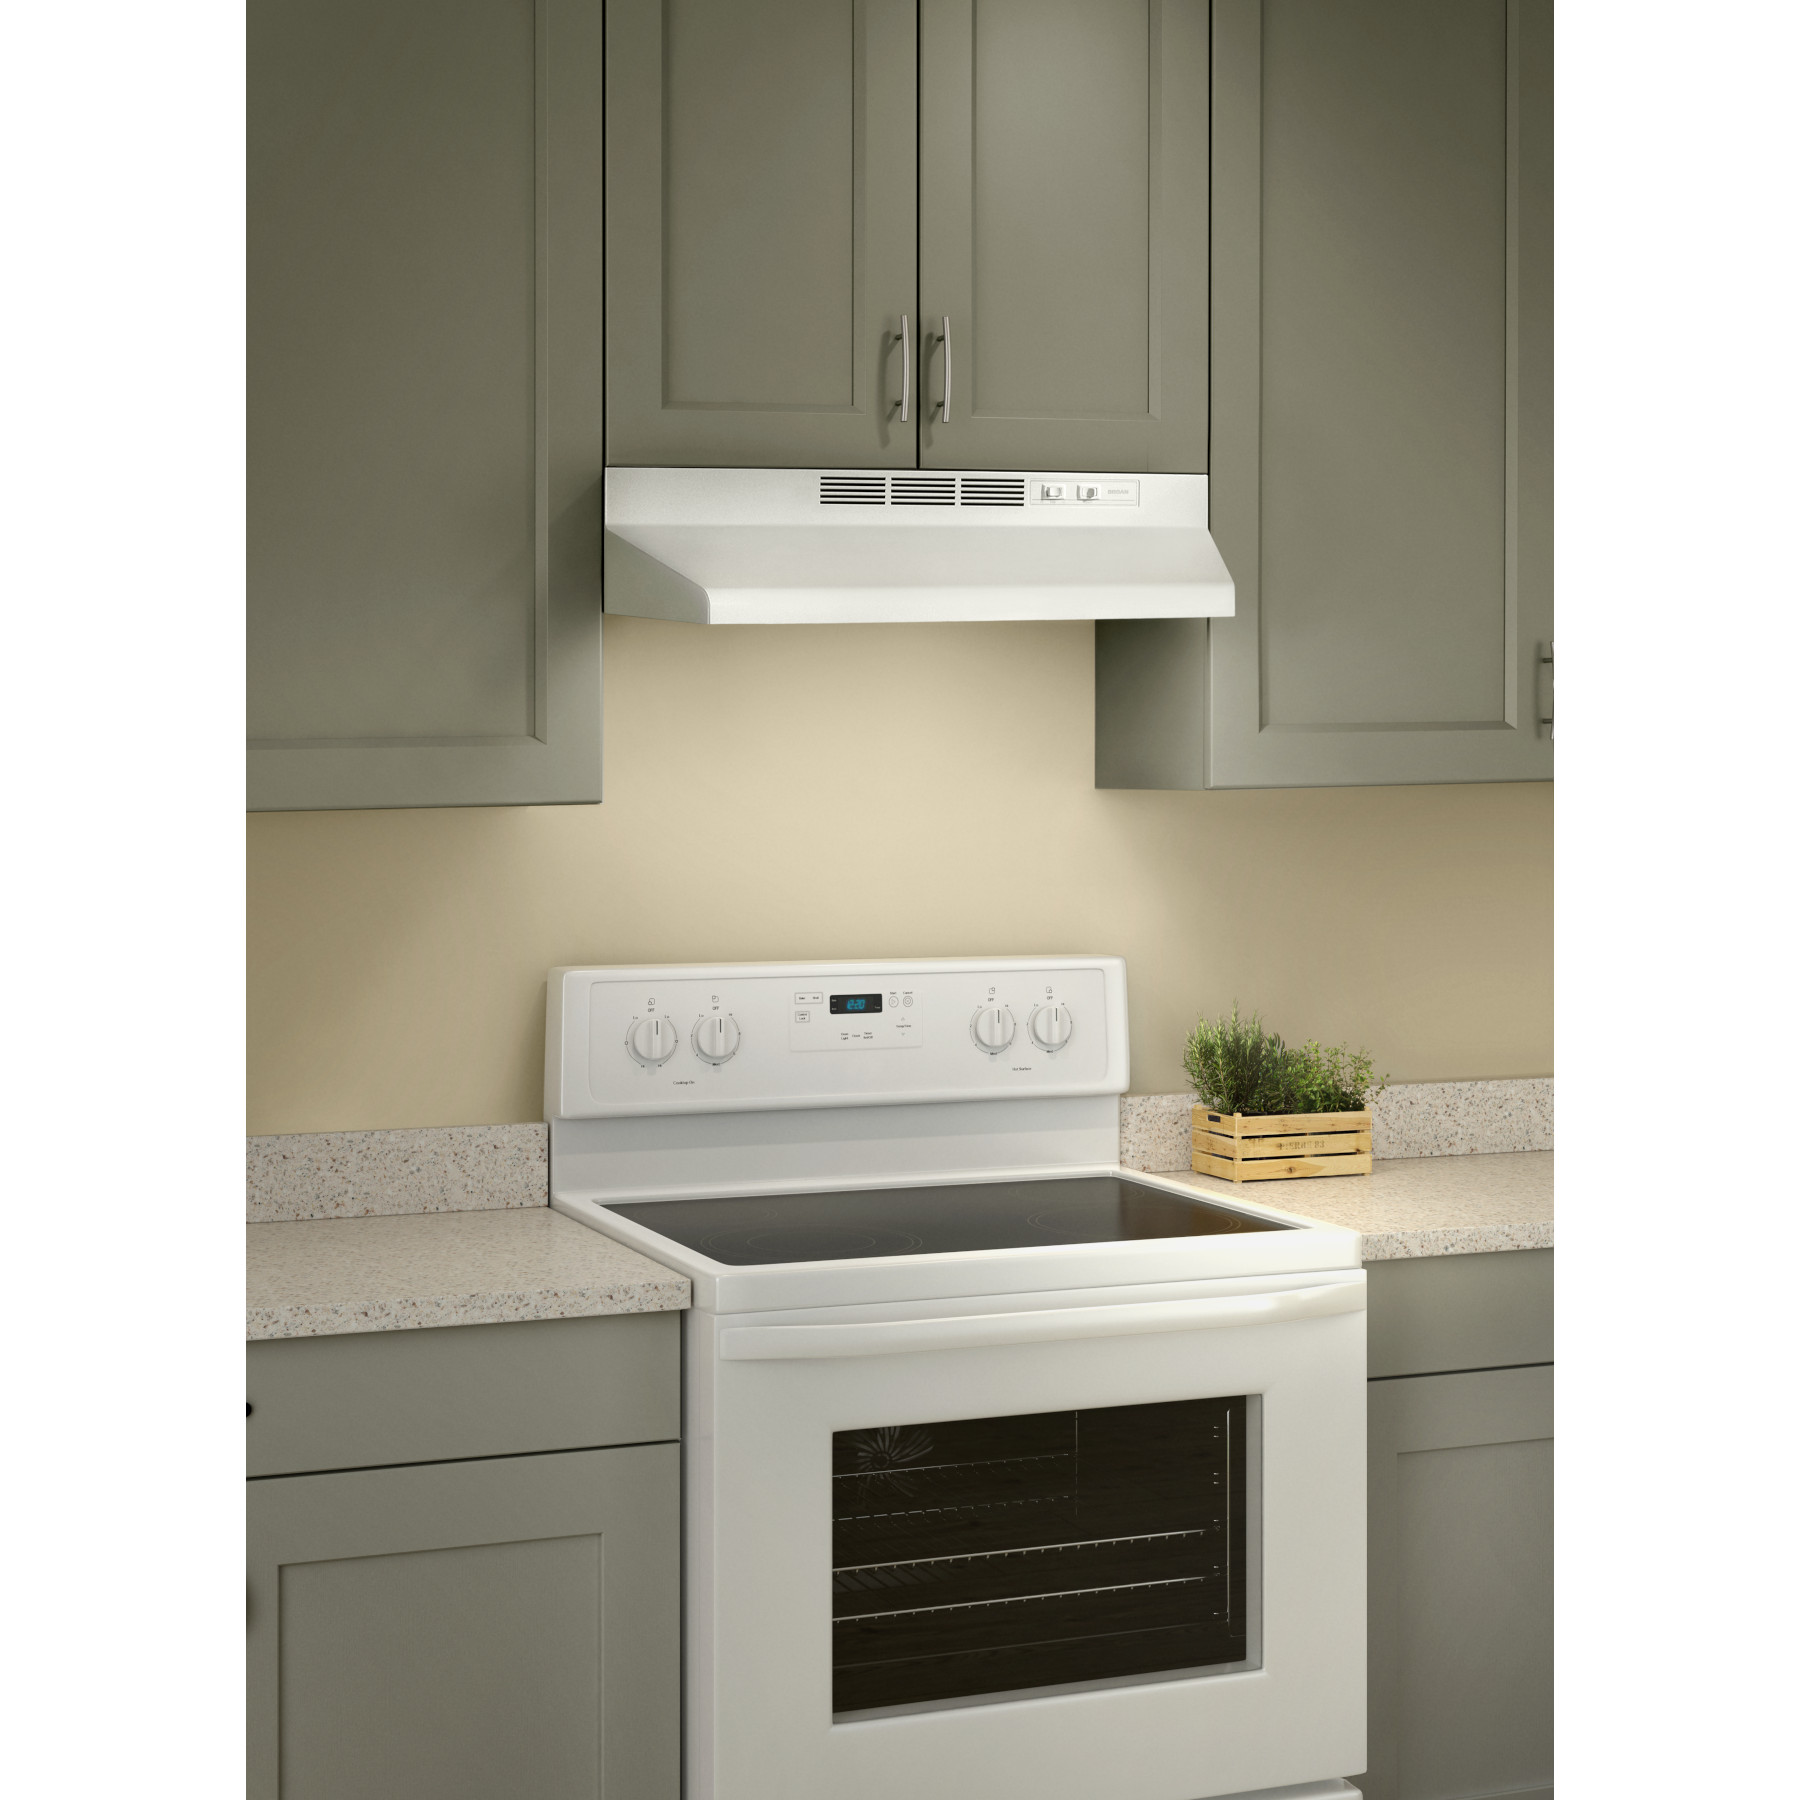 Broan 403001 Economy 30-Inch under Cabinet Ducted Range Hood White for sale online 